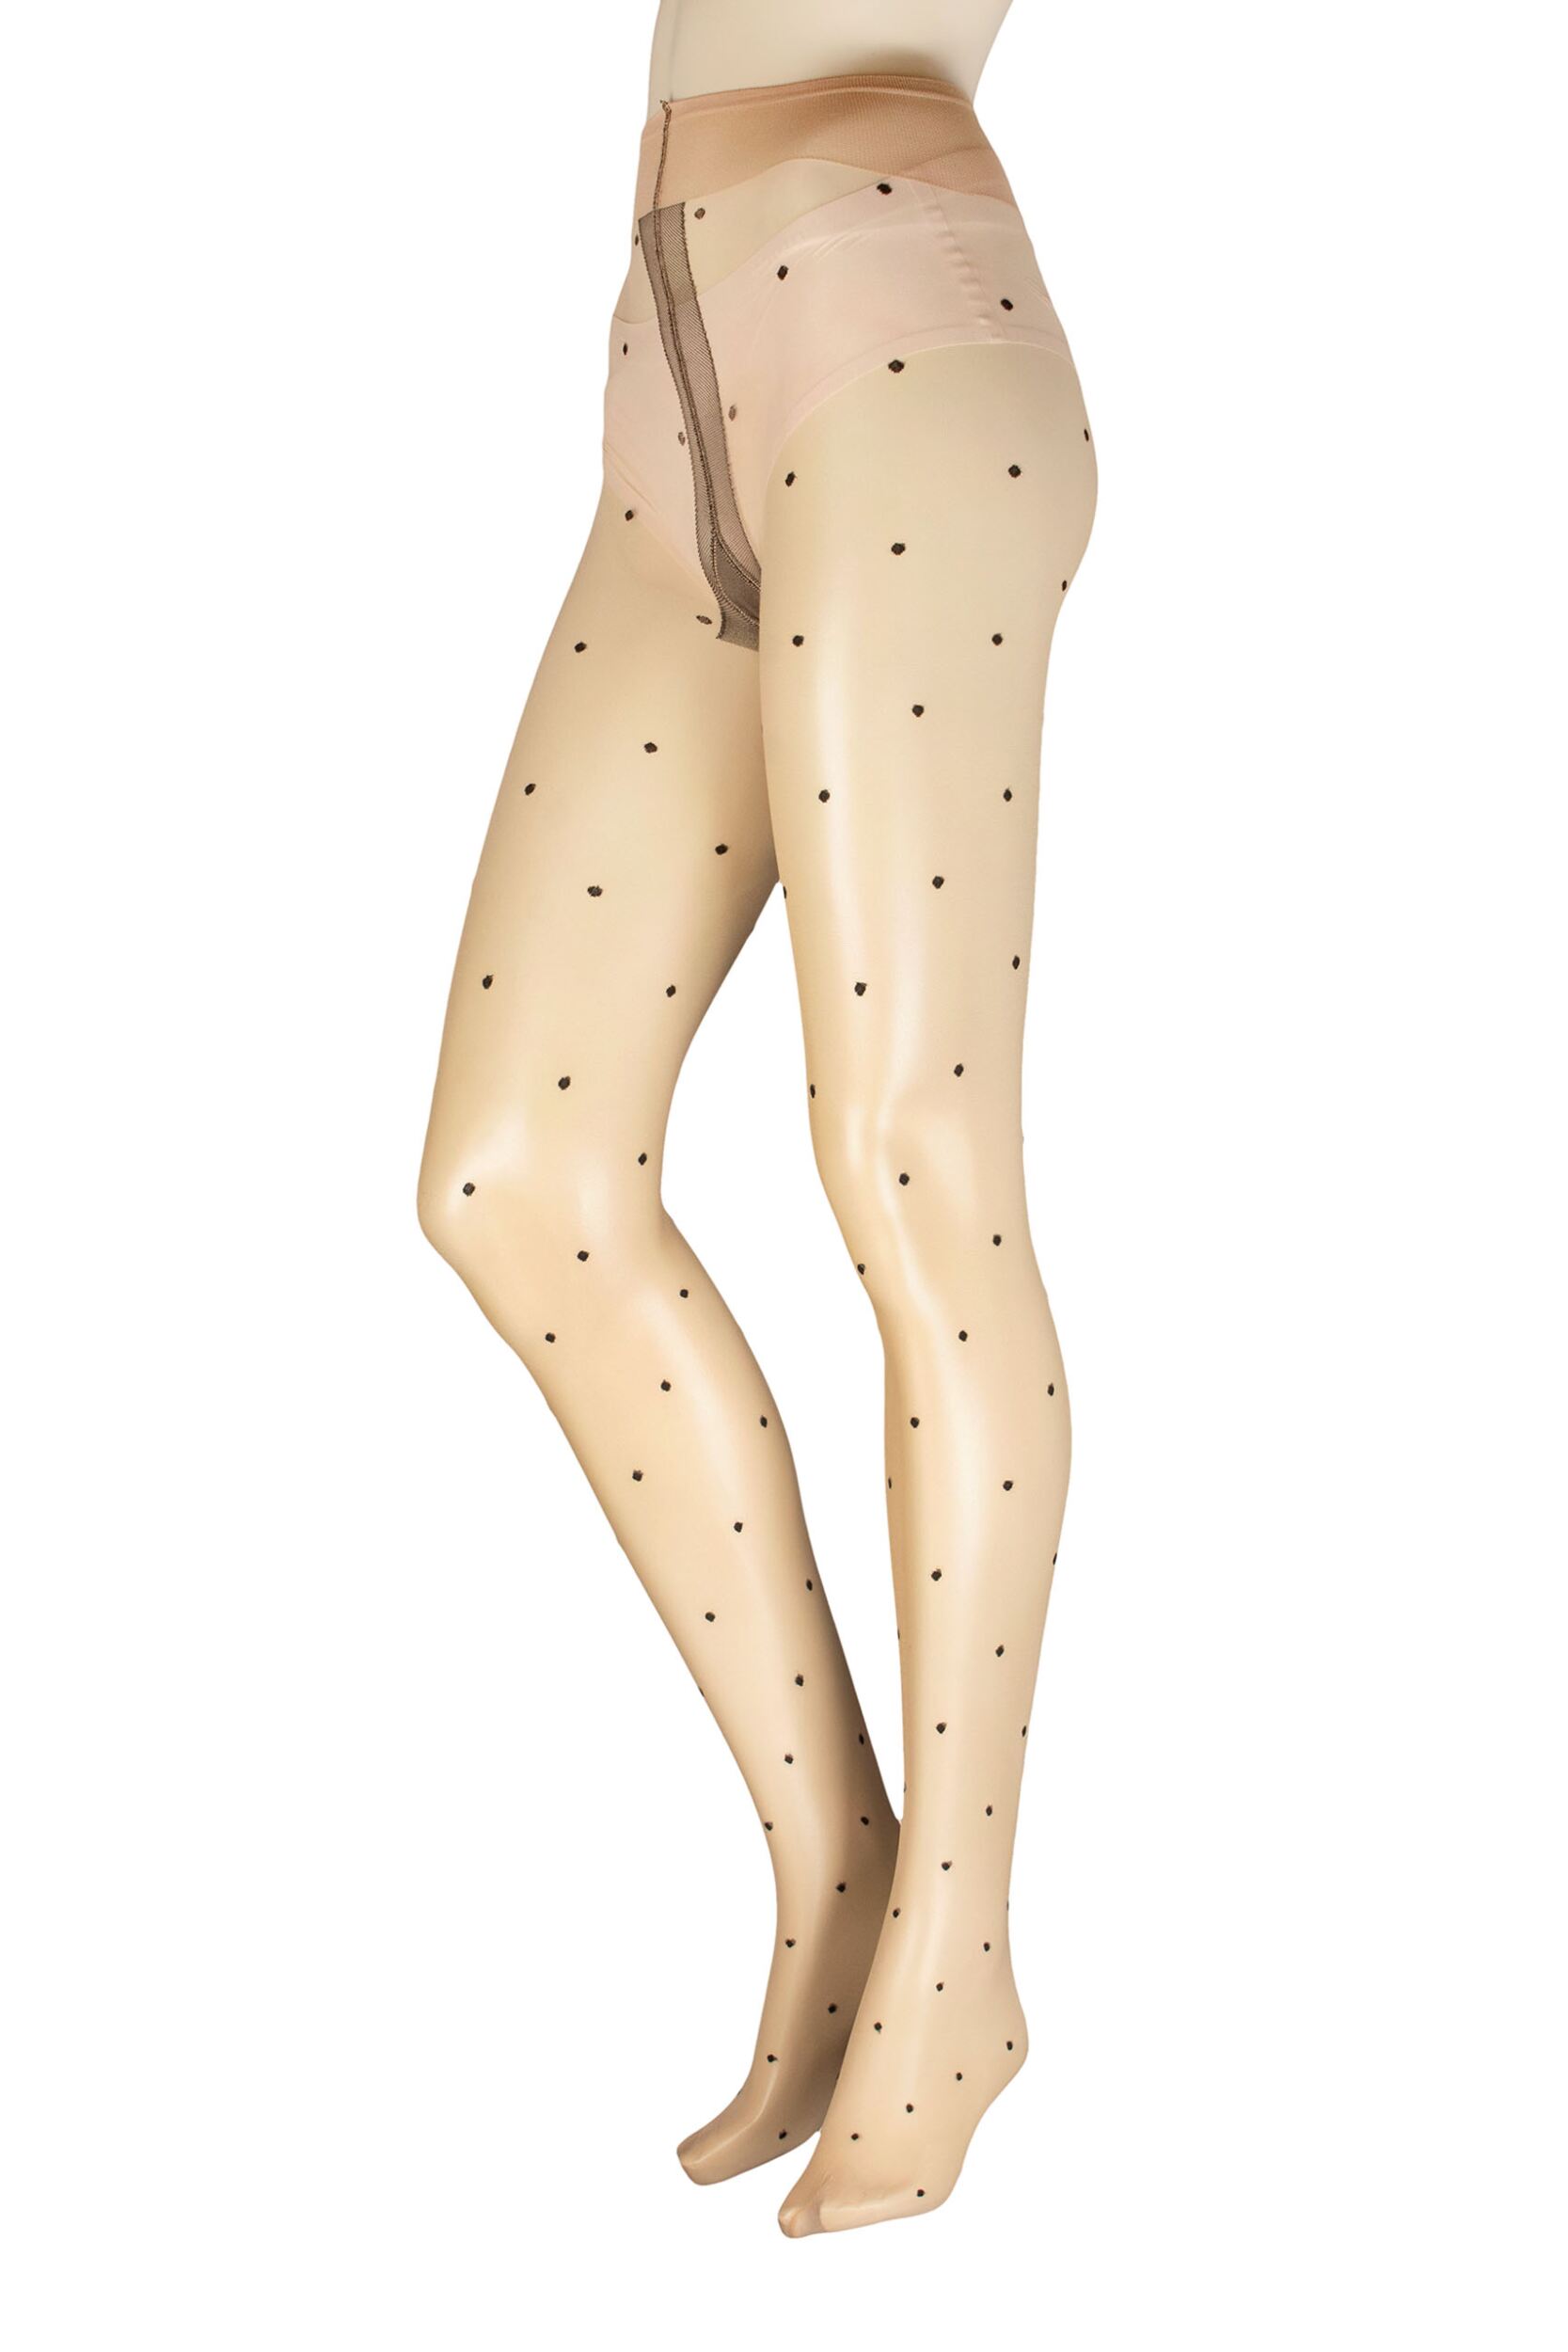 Ladies 1 Pair Trasparenze Anguria Spotted Tights Cosmetic Extra Large